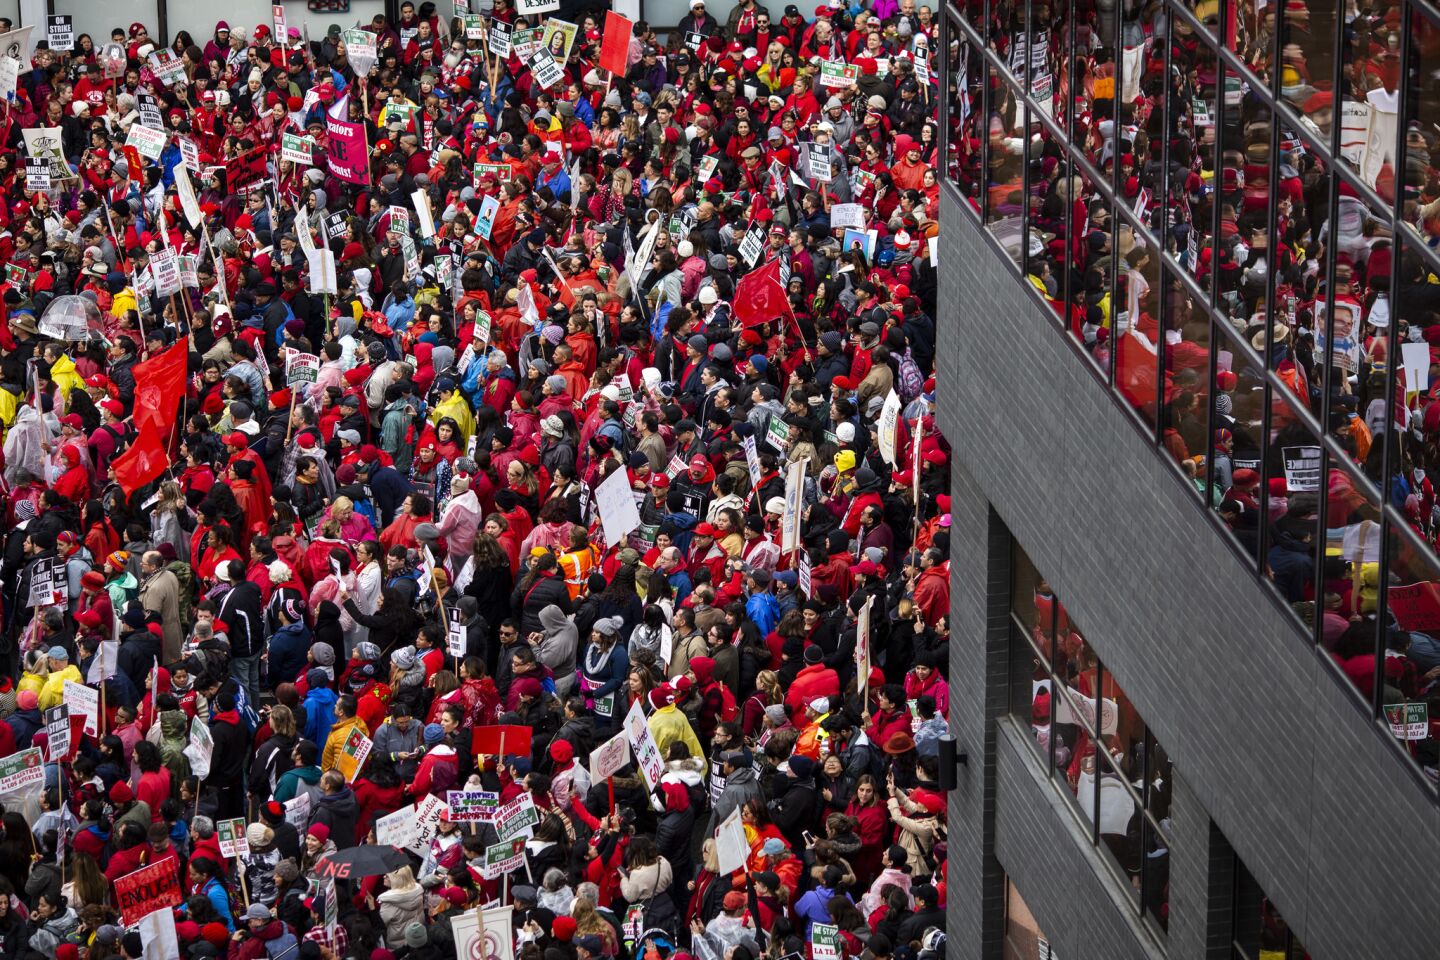 Educators and supporters pack San Pedro Street in downtown Los Angeles at a rally outside the headquarters of the California Charter Schools Association.